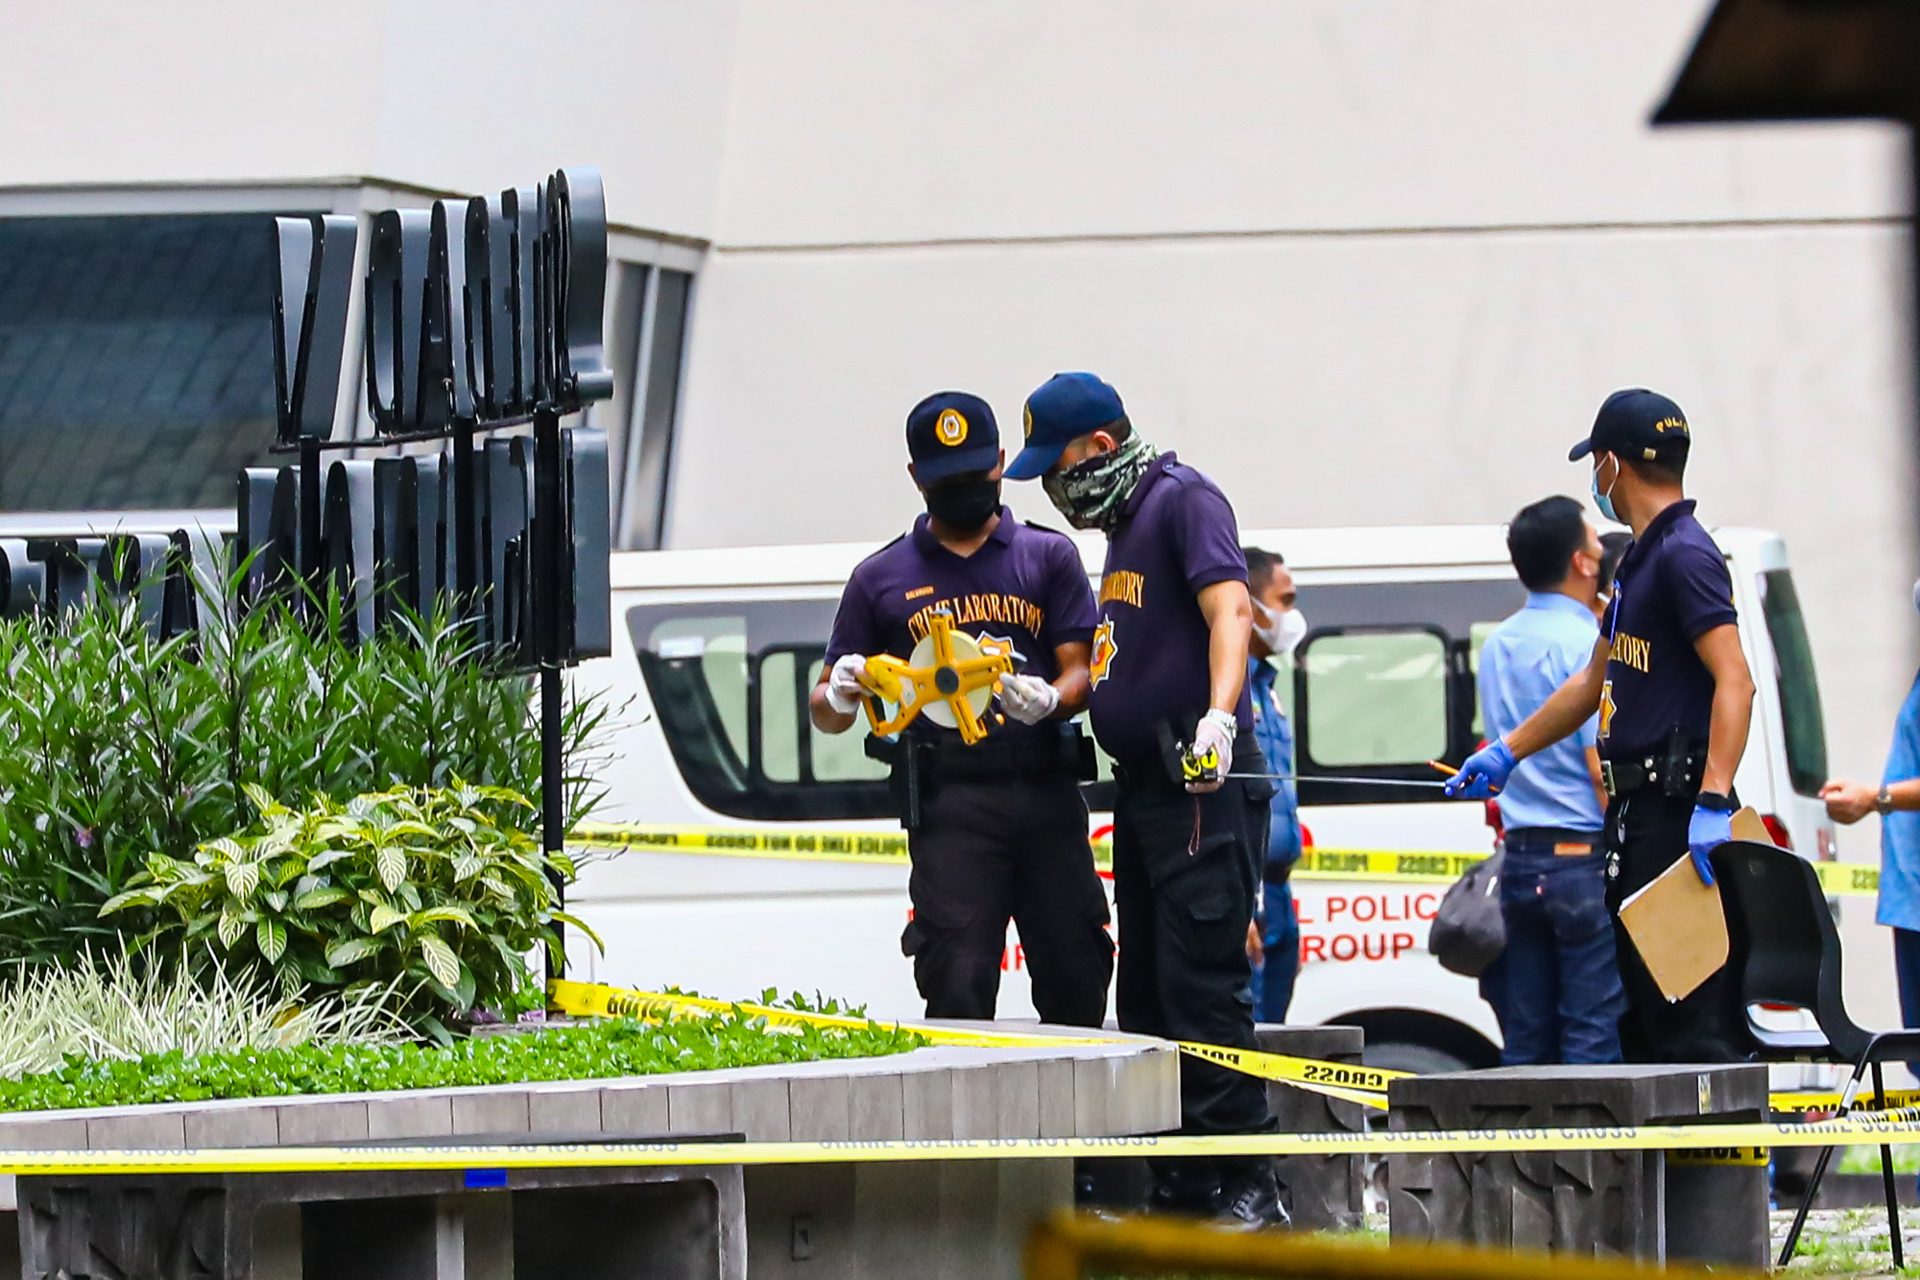 What we know so far: The shooting incident inside Ateneo